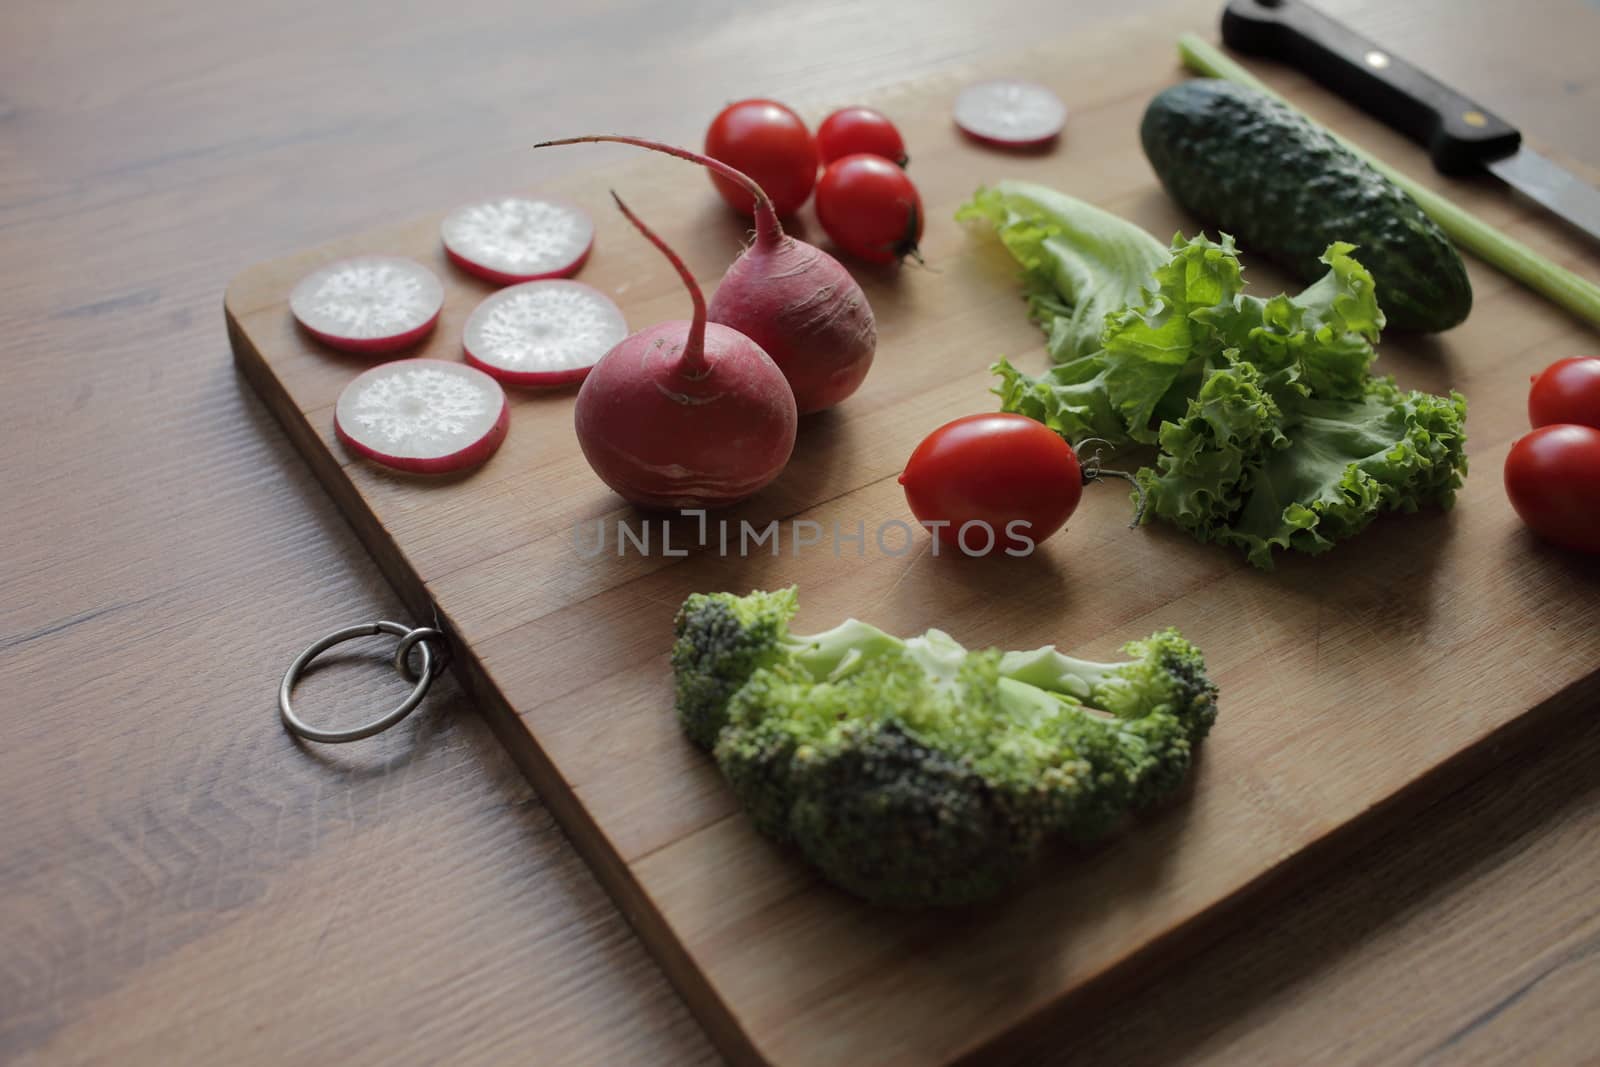 Fresh vegetables on a cutting board on a wooden table Tomatoes, cucumber, lettuce, broccoli, radish, knife